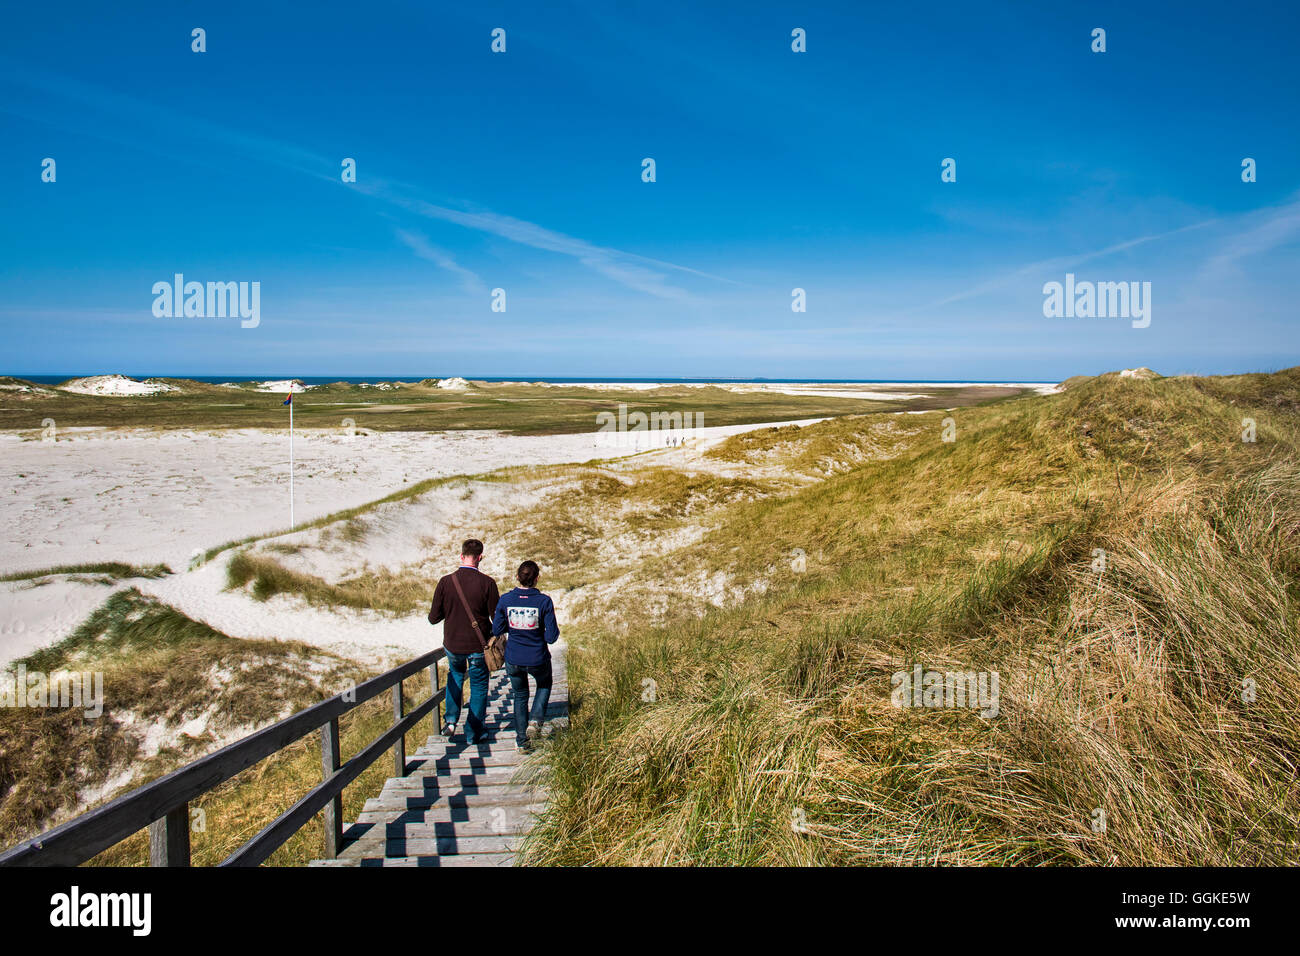 Hikers in the dunes, Amrum Island, North Frisian Islands, Schleswig-Holstein, Germany Stock Photo